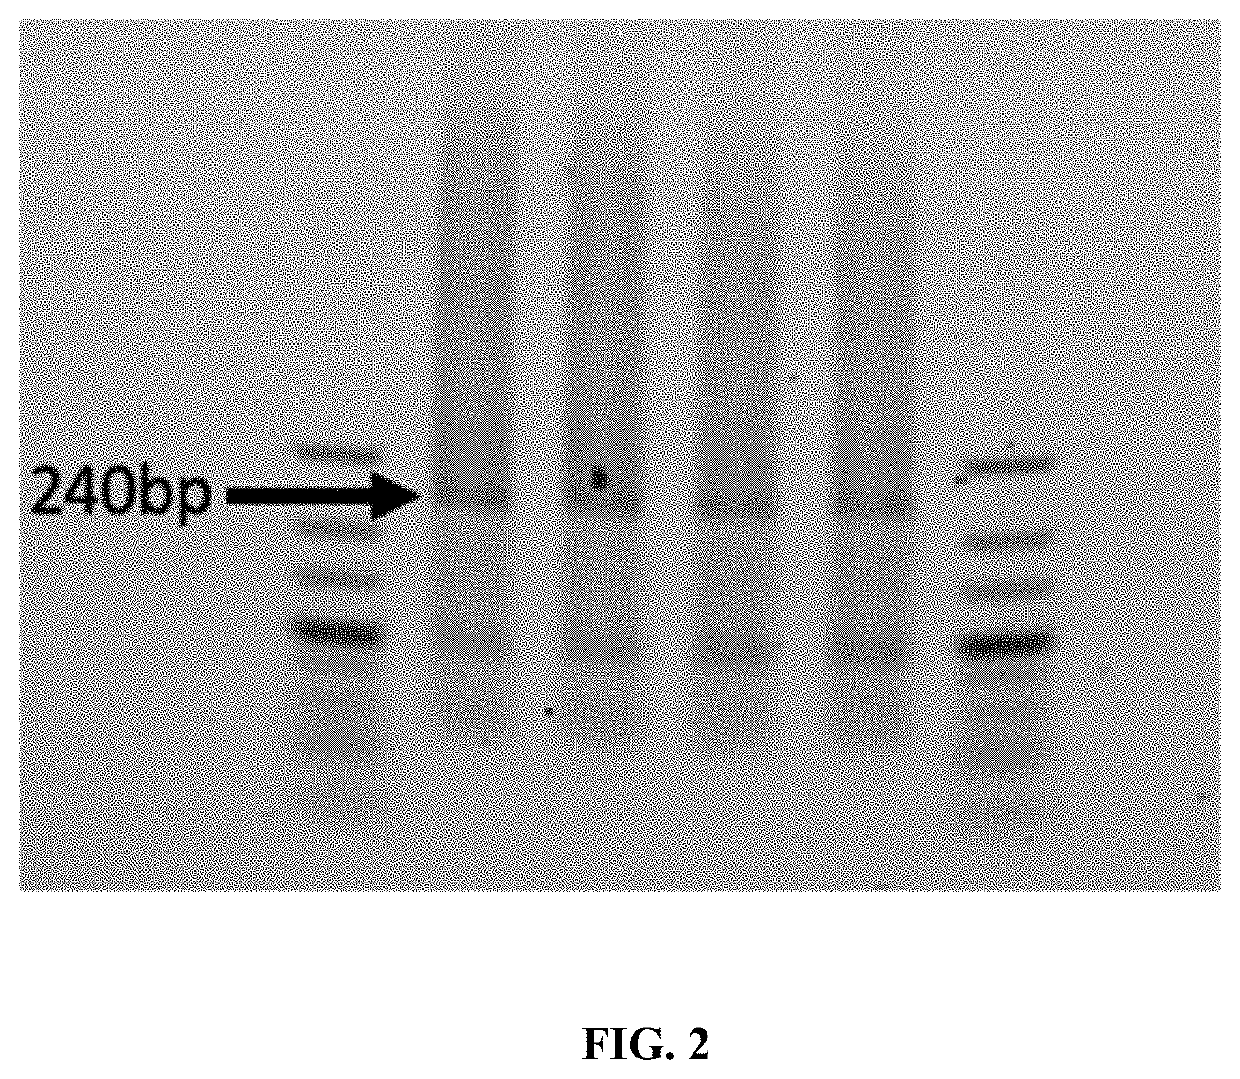 Methods for assembling nucleic acids